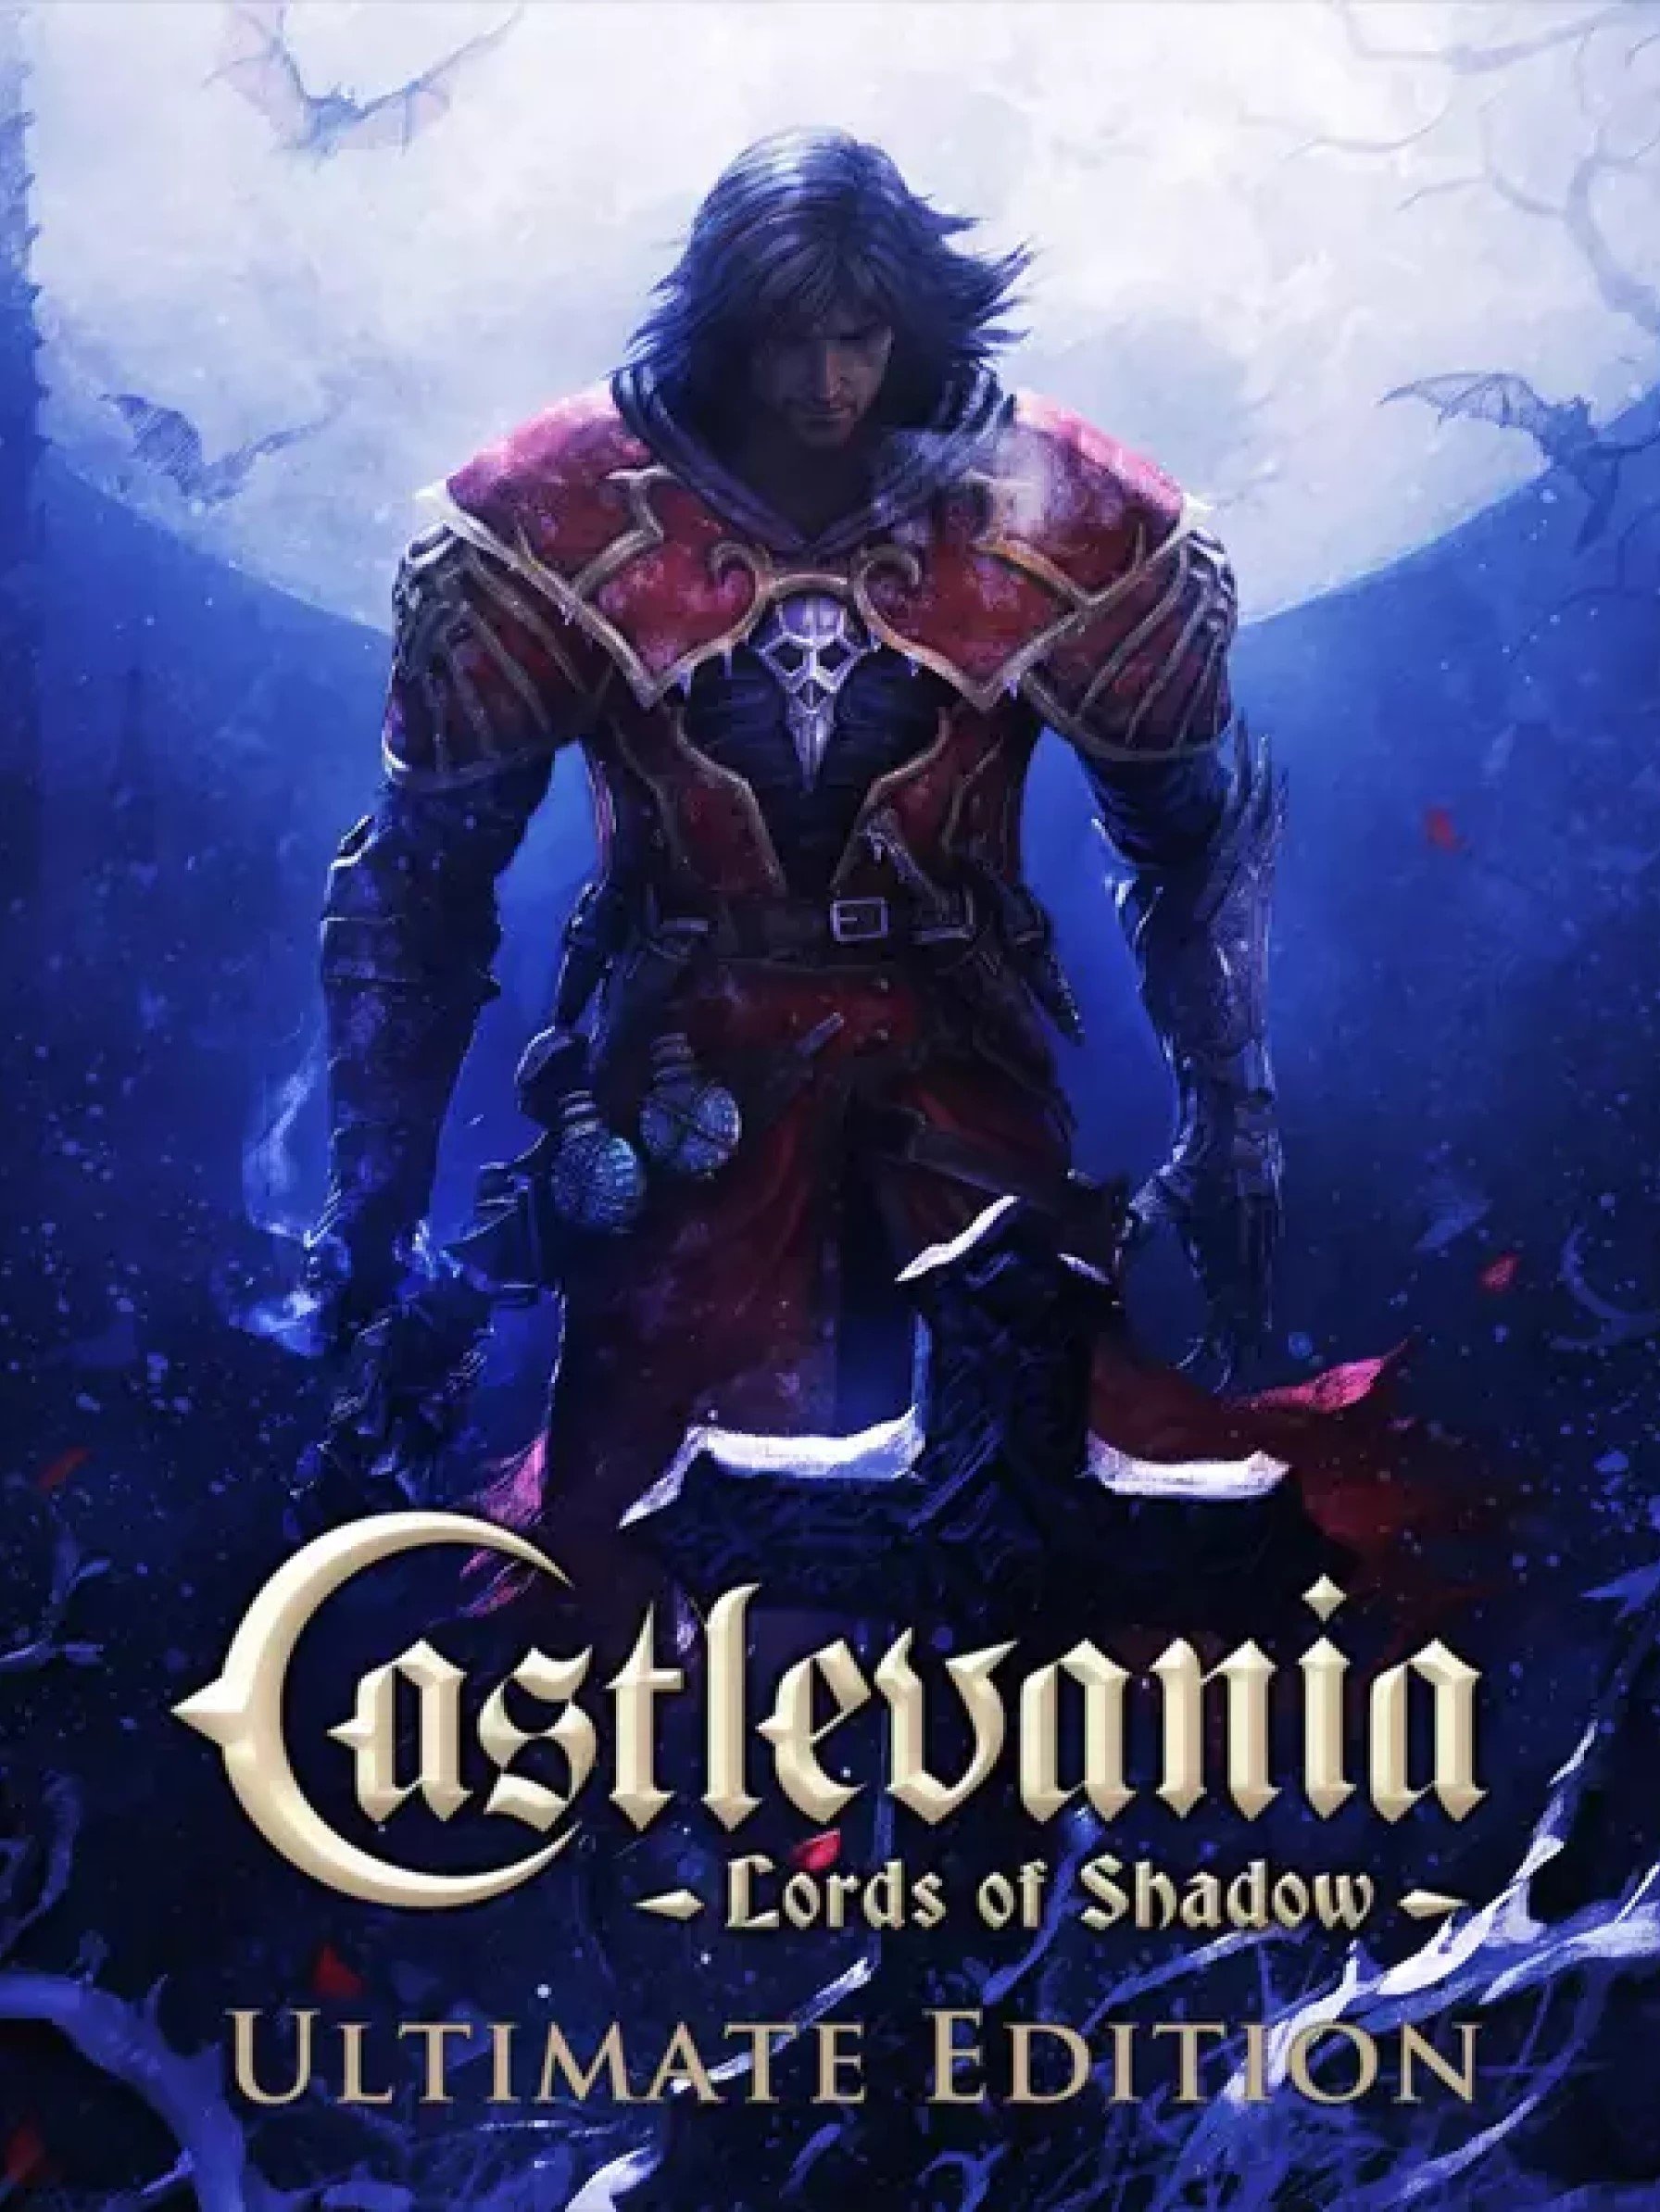 Castlevania: Lords of Shadow - Ultimate Edition (2010-2013)